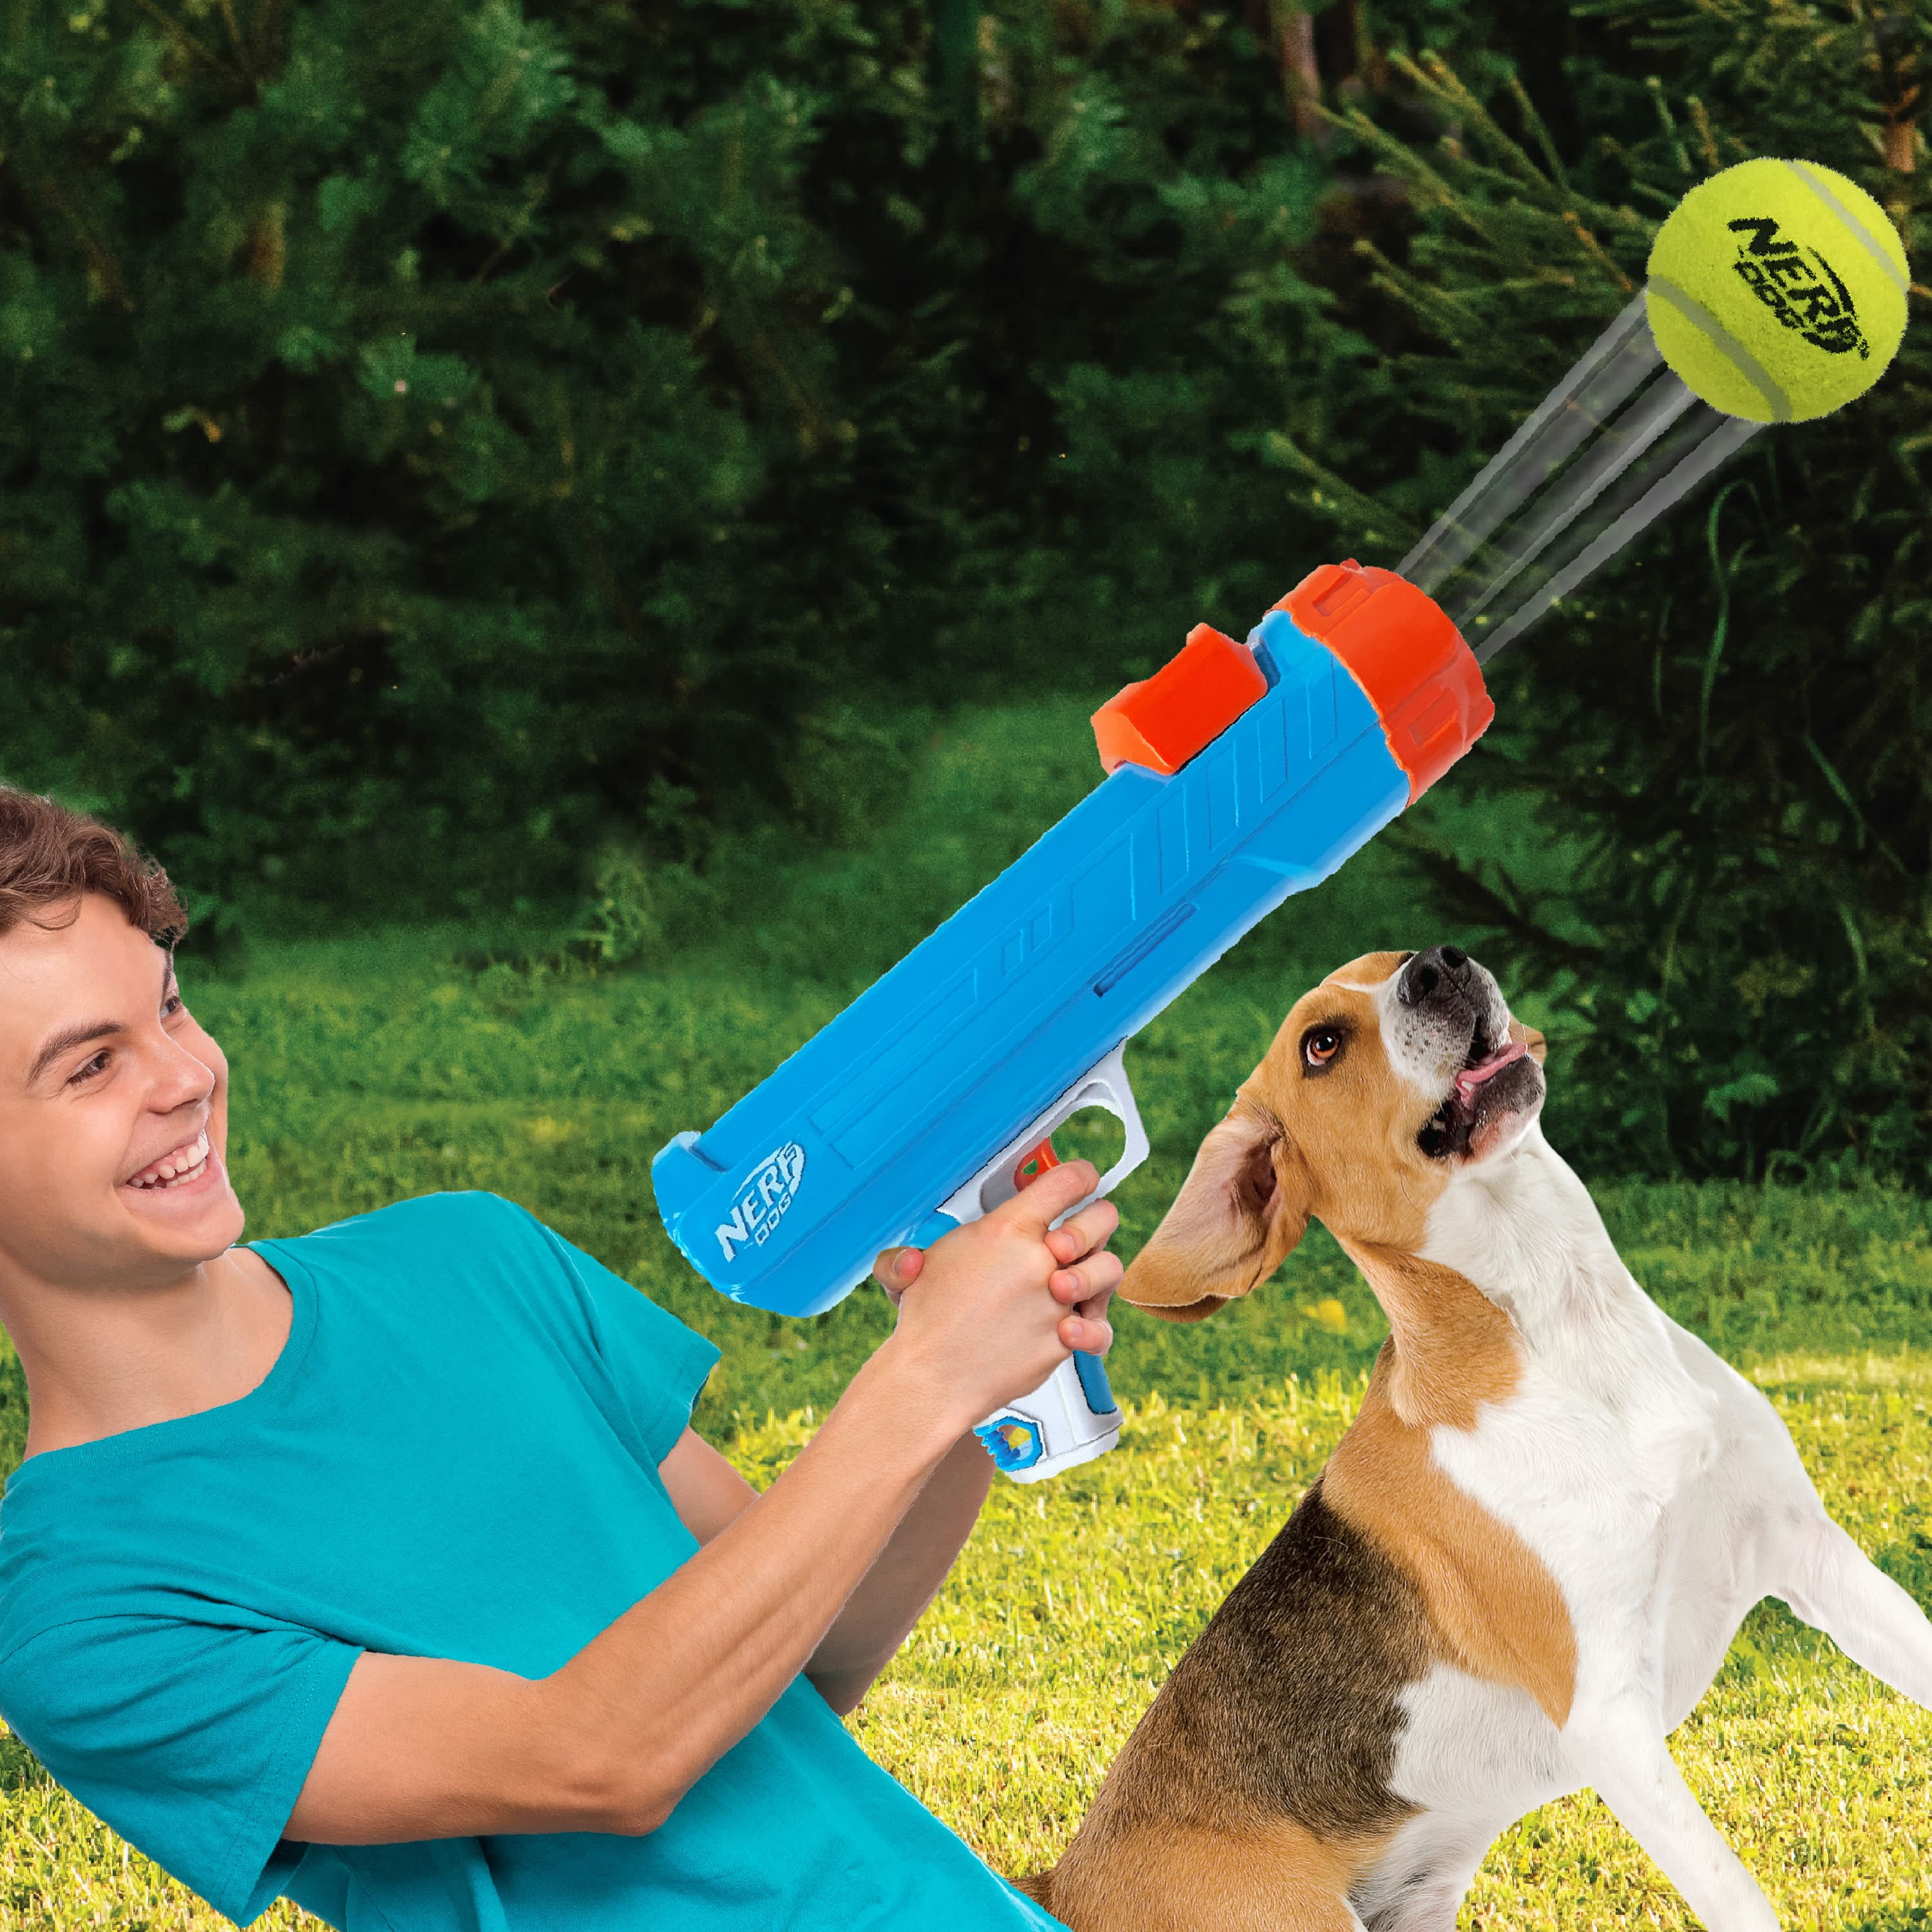 NEW NERF 16in Tennis Ball Blaster with 3 Tennis Balls Dogs Fetch Pets  Sealed